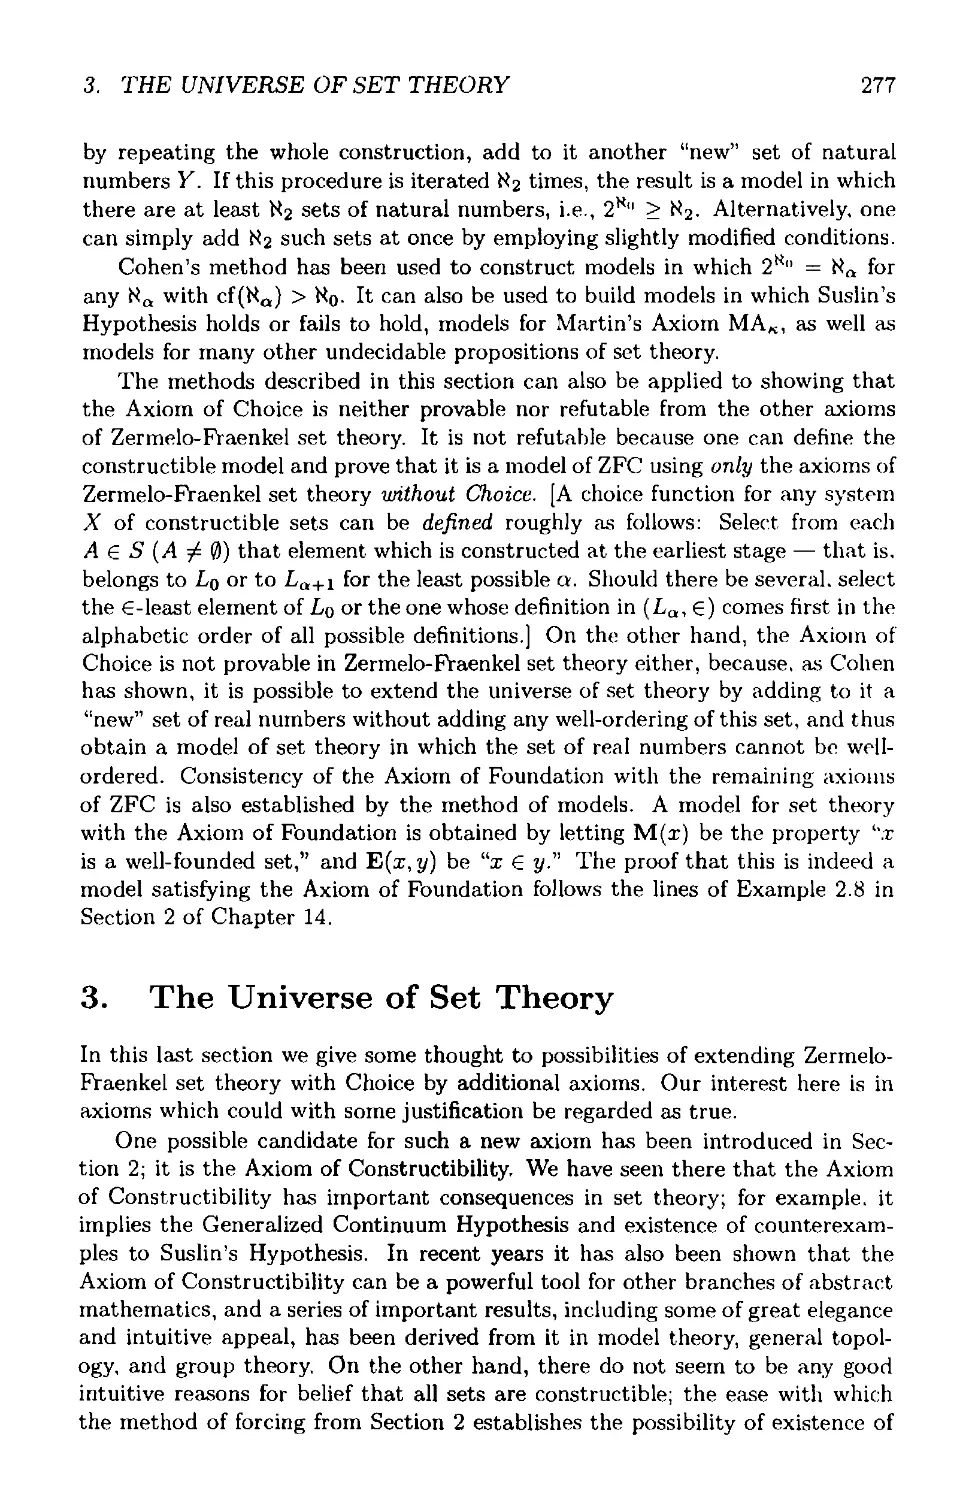 3 The Universe of Set Theory